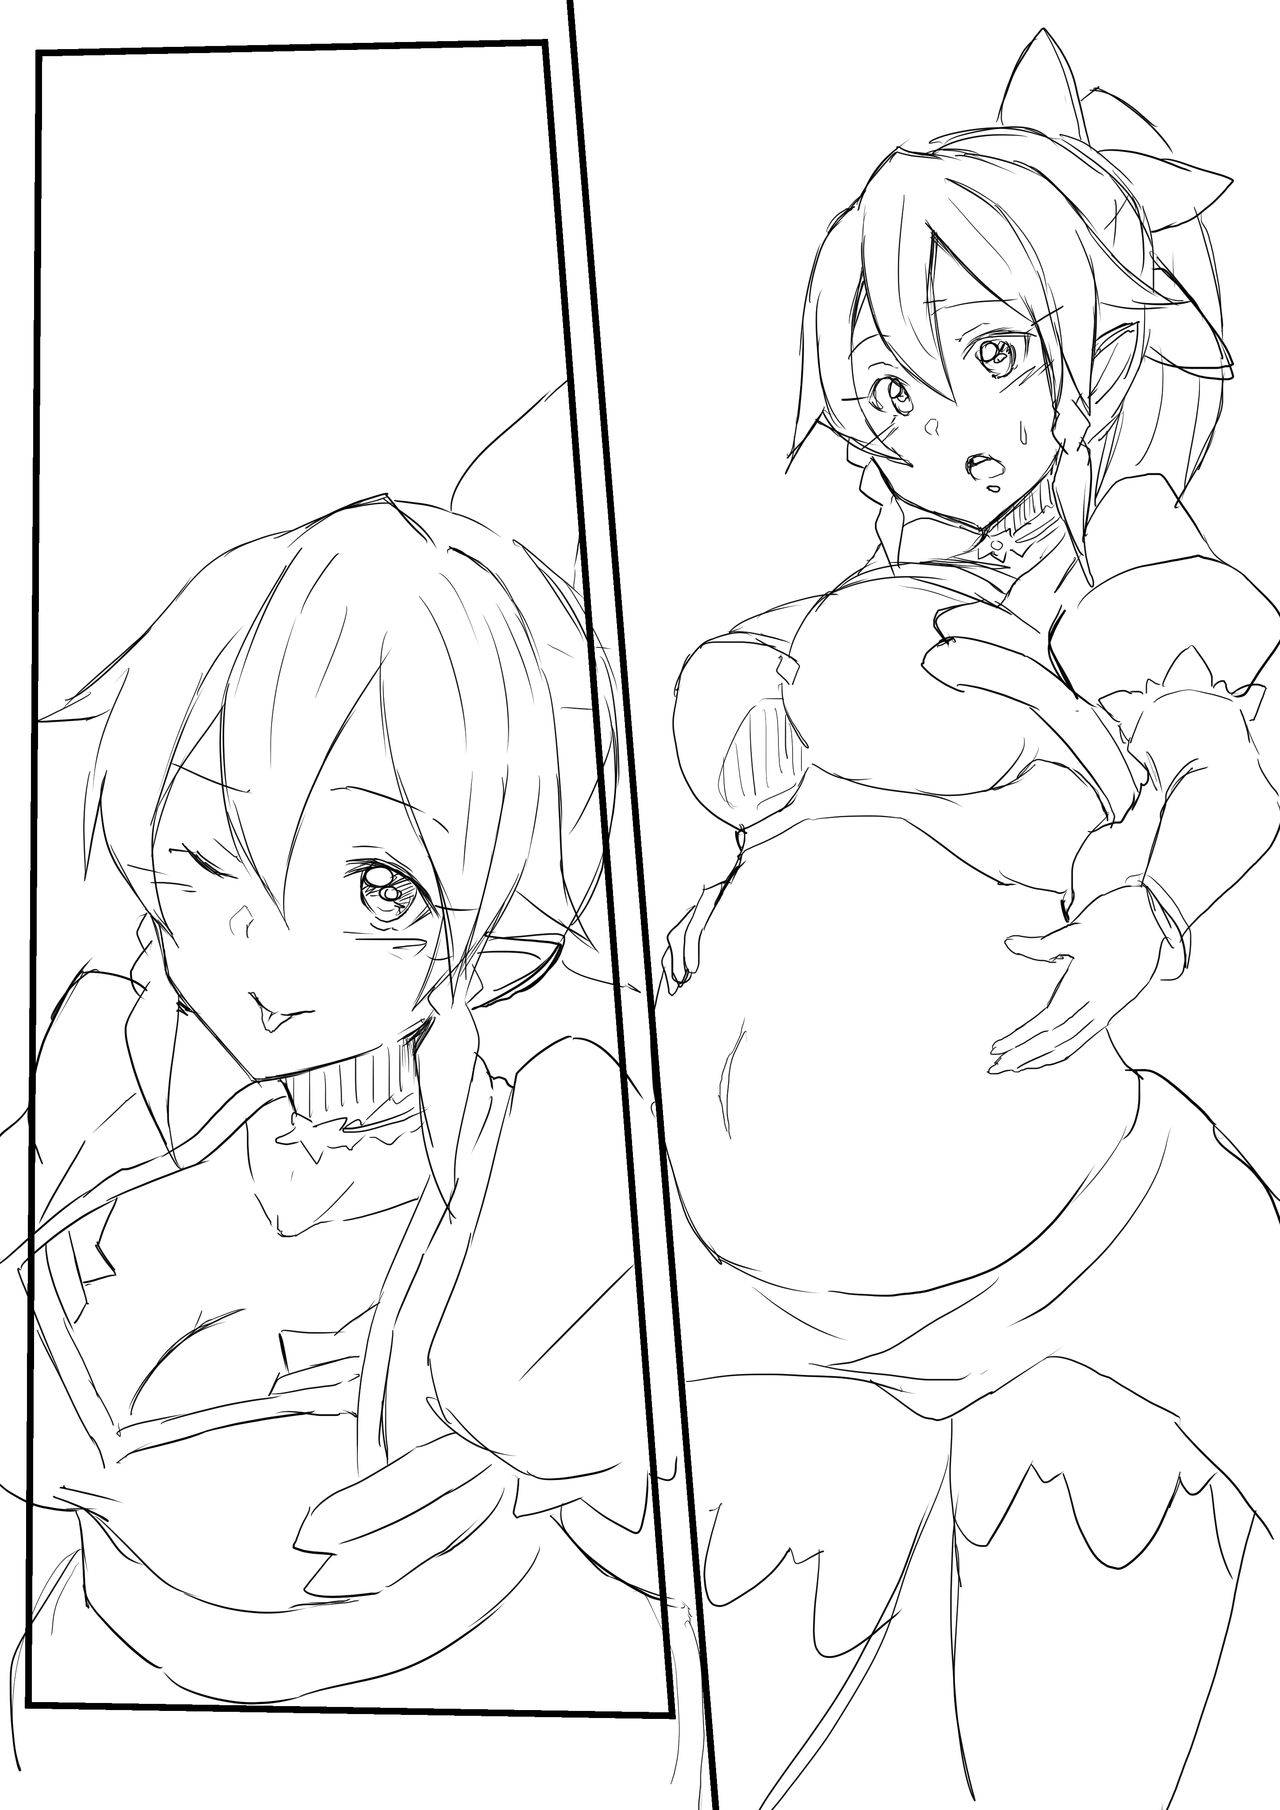 [Cliip] Leafa vore page 3 full